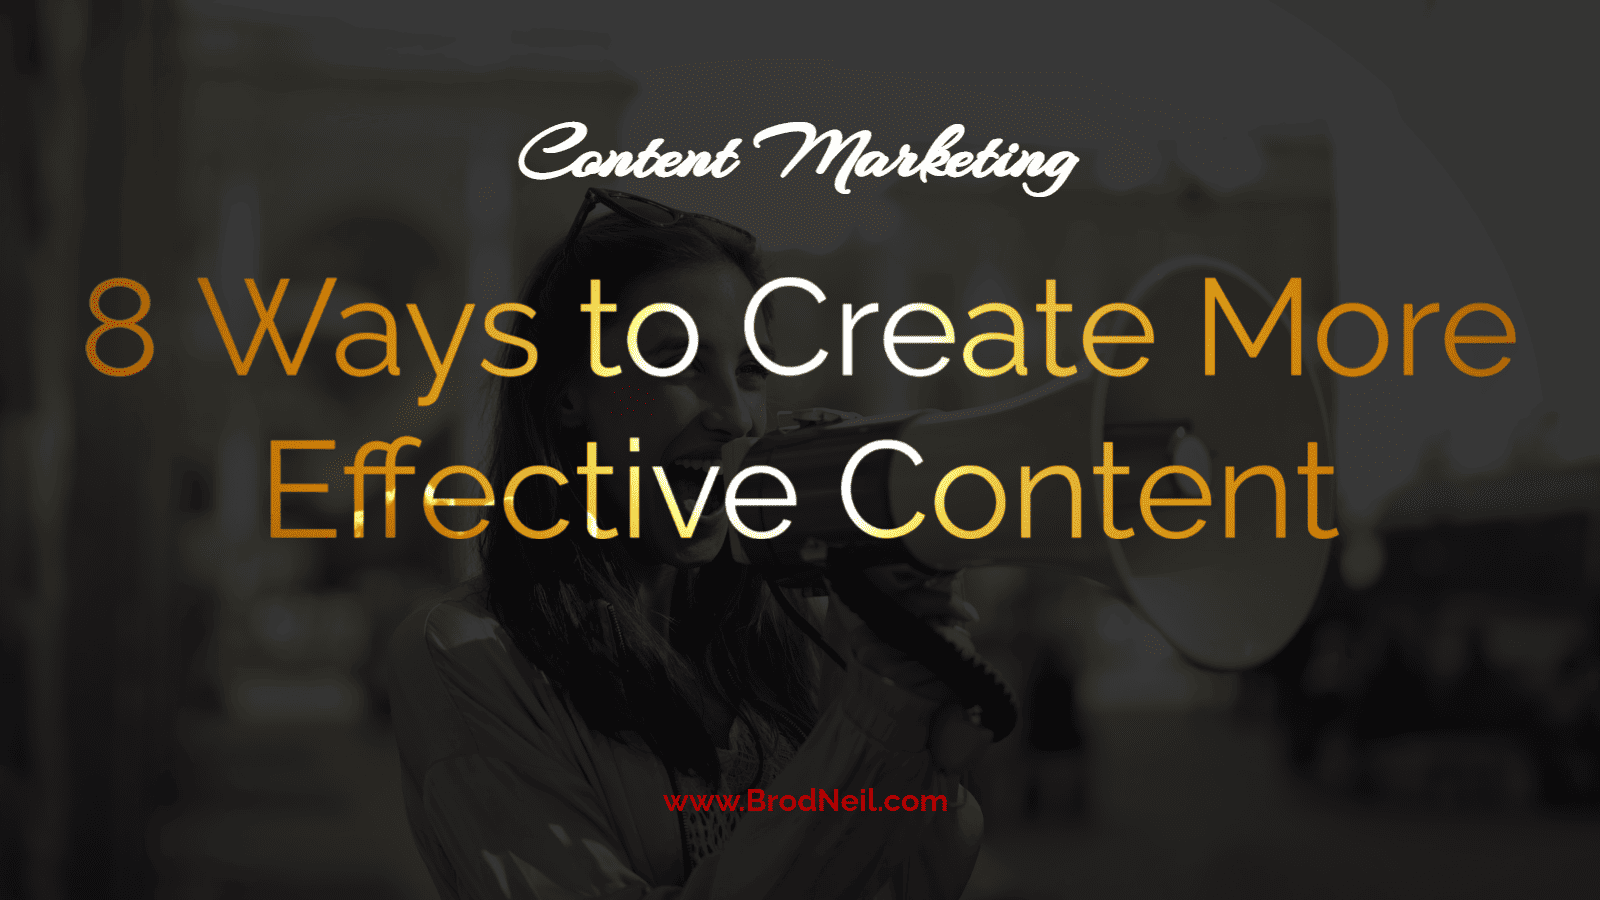 8 Ways to Create More Effective Content